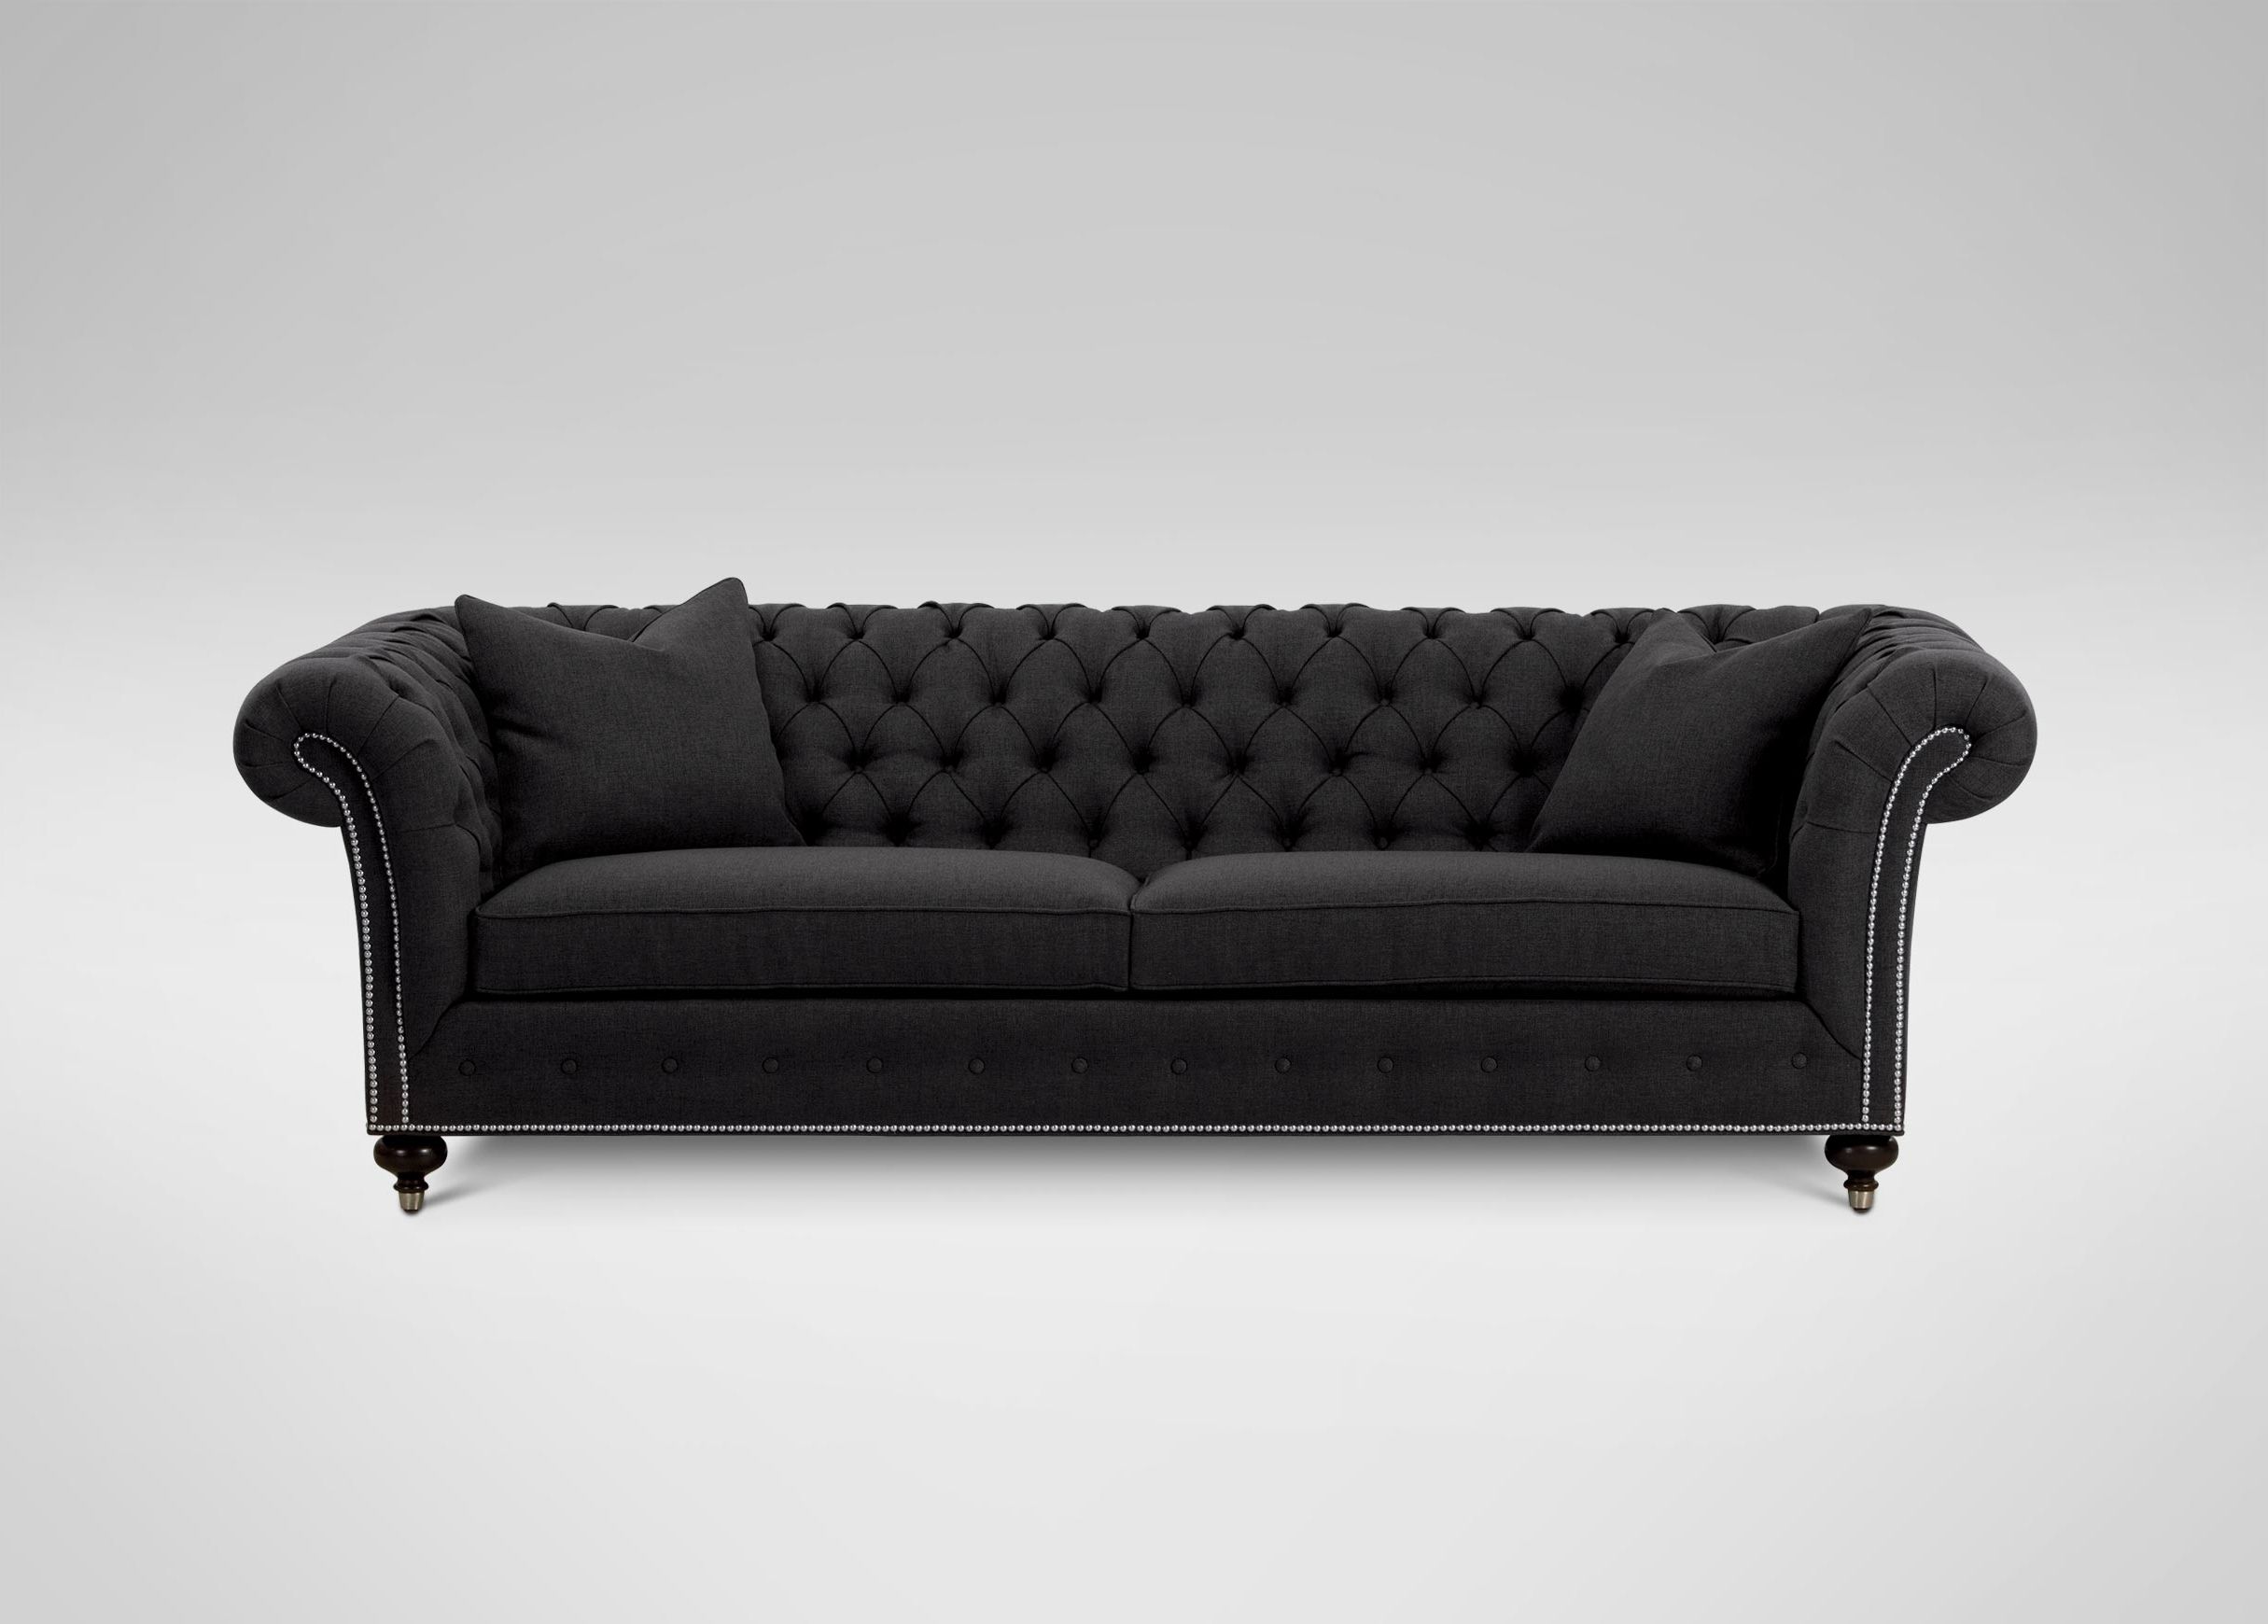 Ethan Allen Sofas And Chairs For 2019 Mansfield Sofa (View 11 of 20)